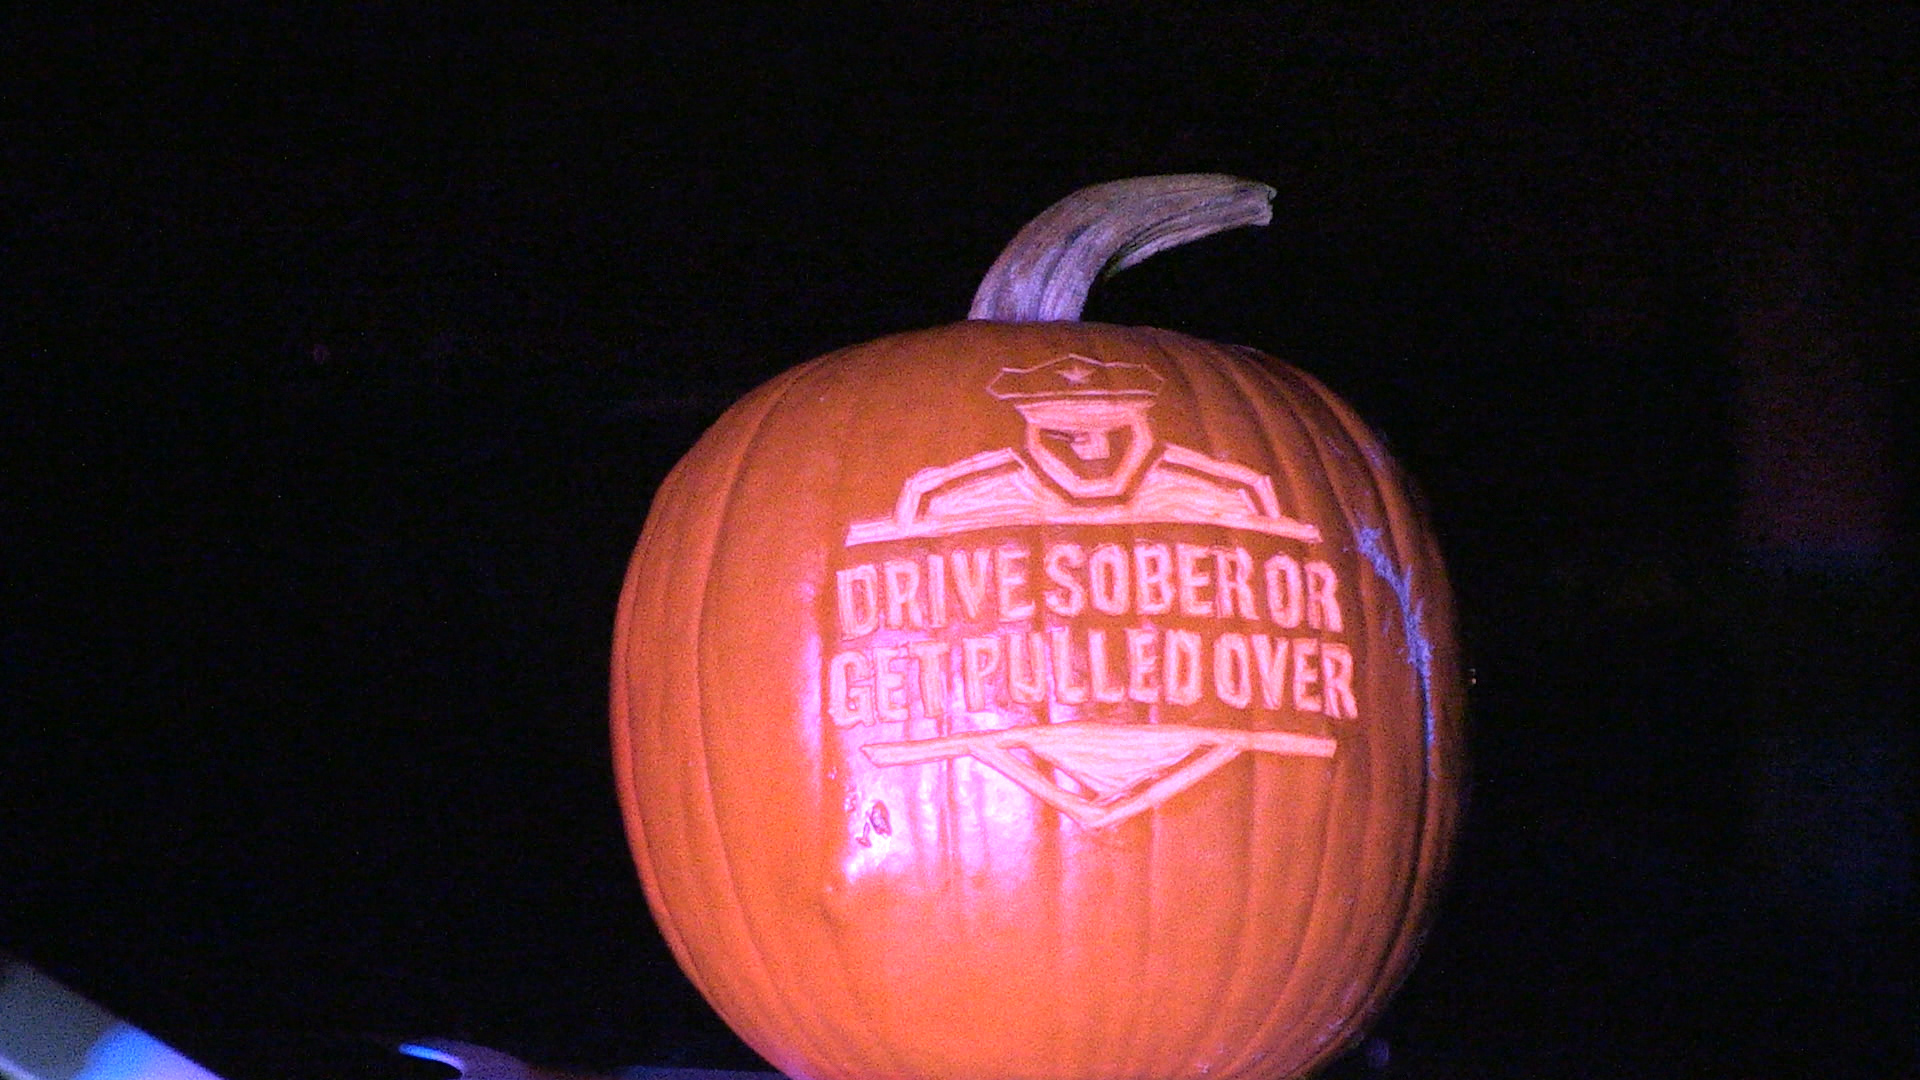 Pumpkin is carved with the Drive Sober or Get Pulled Over Logo